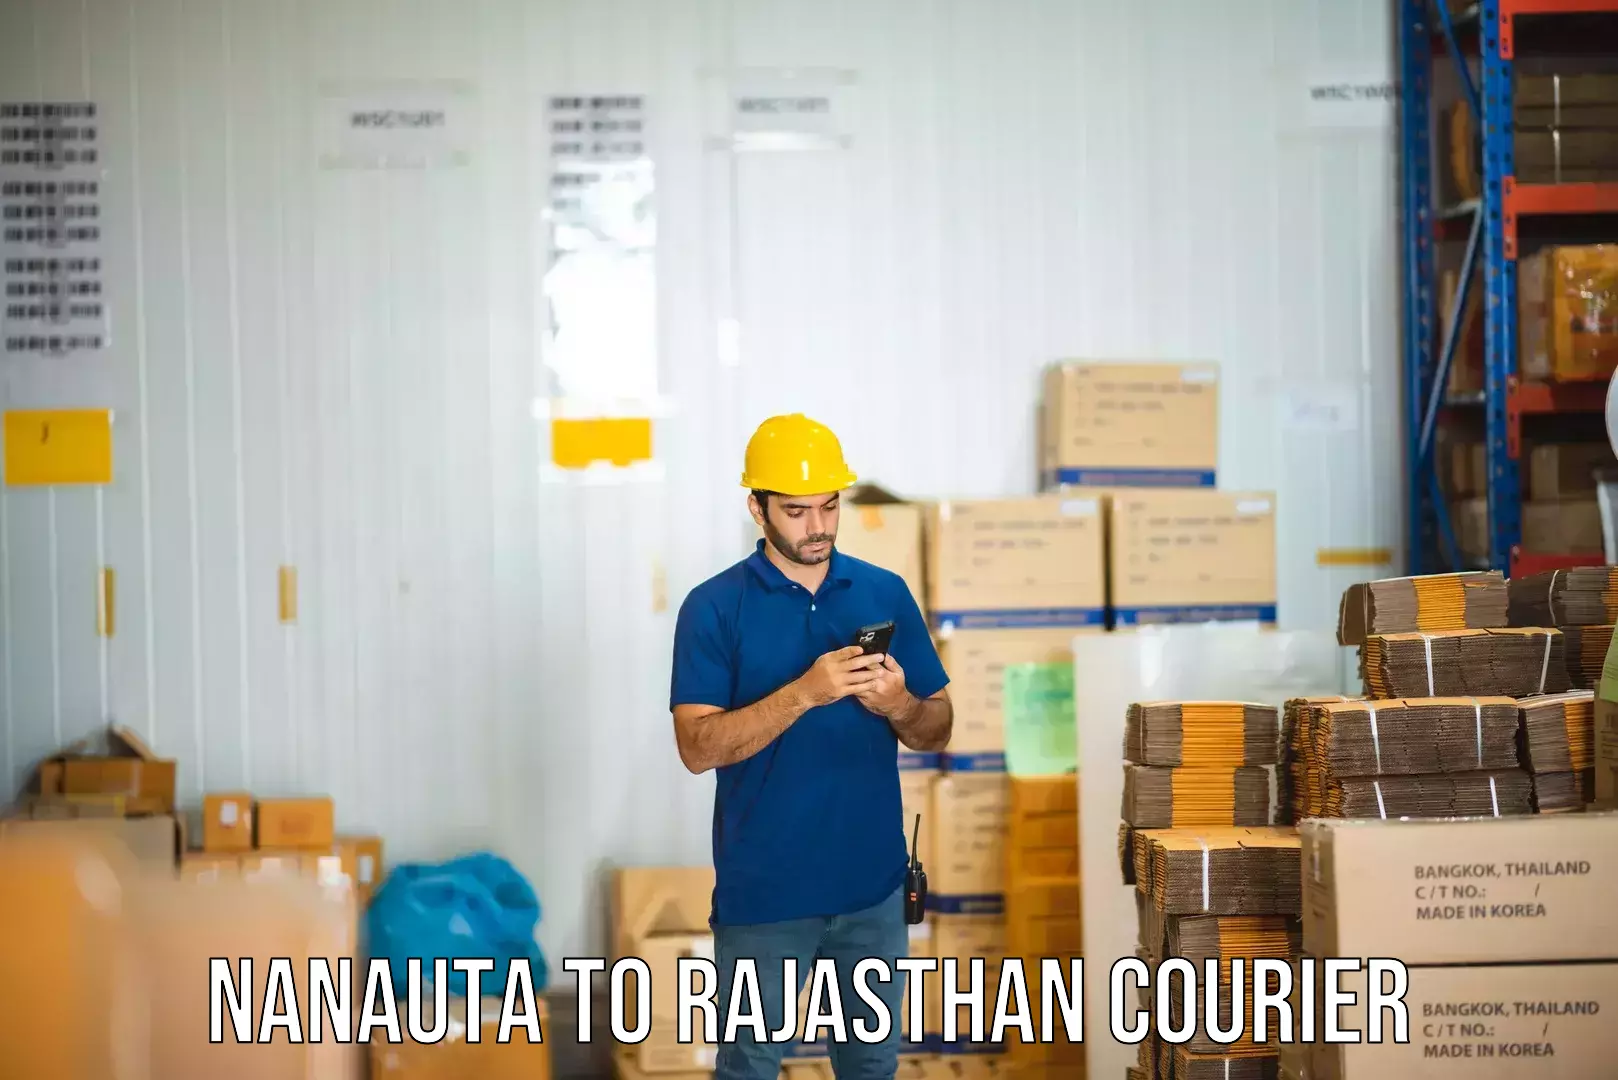 Air courier services in Nanauta to Sultana